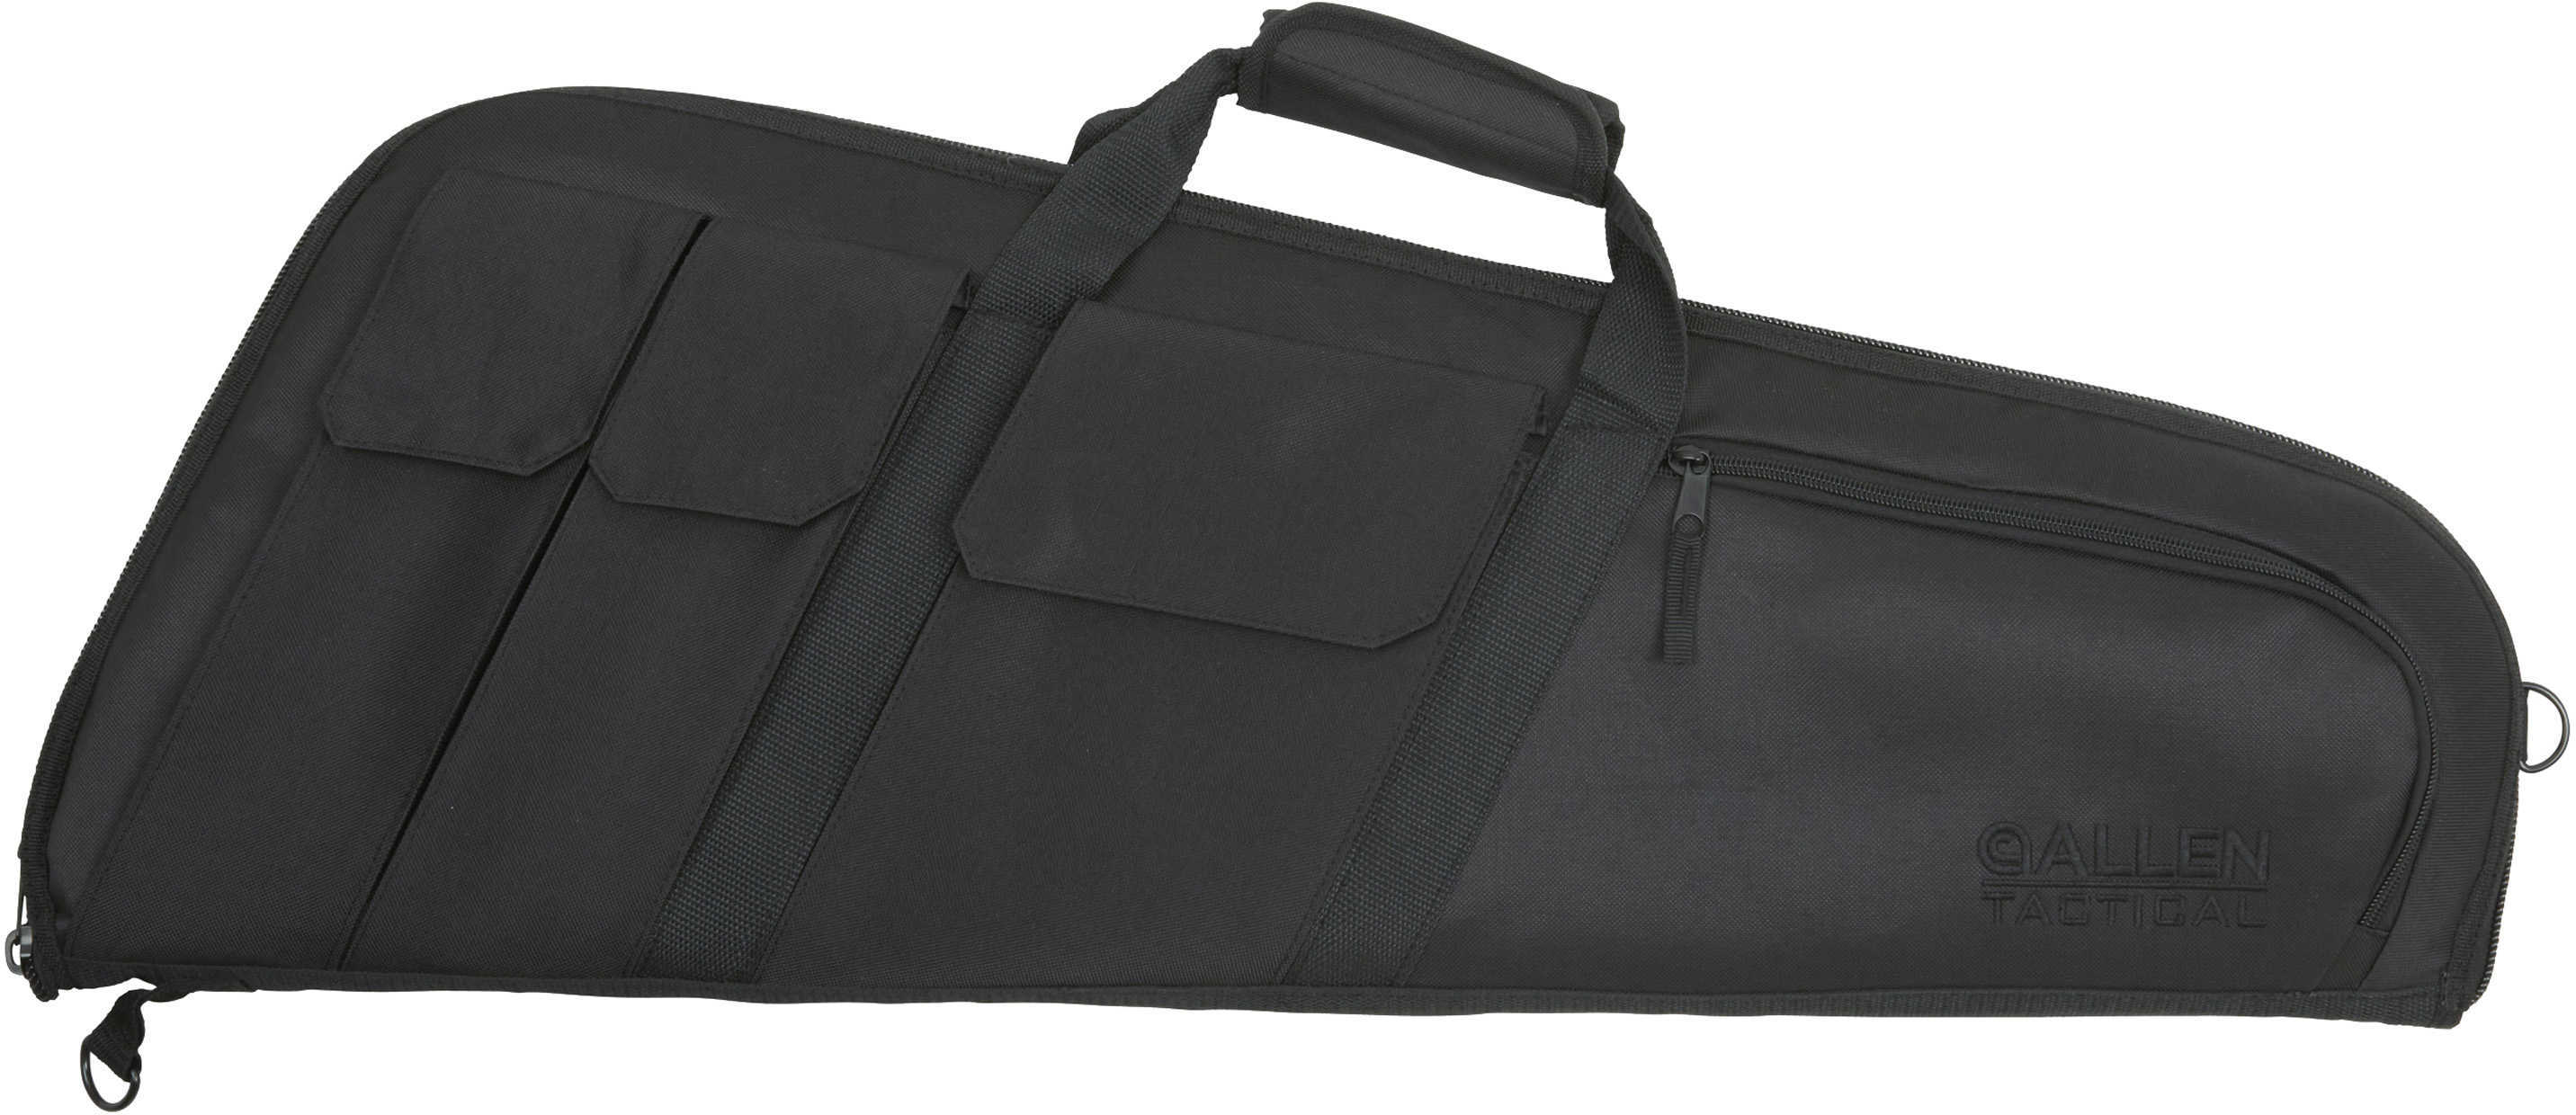 Allen Cases Wedge Tactical Rifle Case, Black, 32-Inch Md: 10901